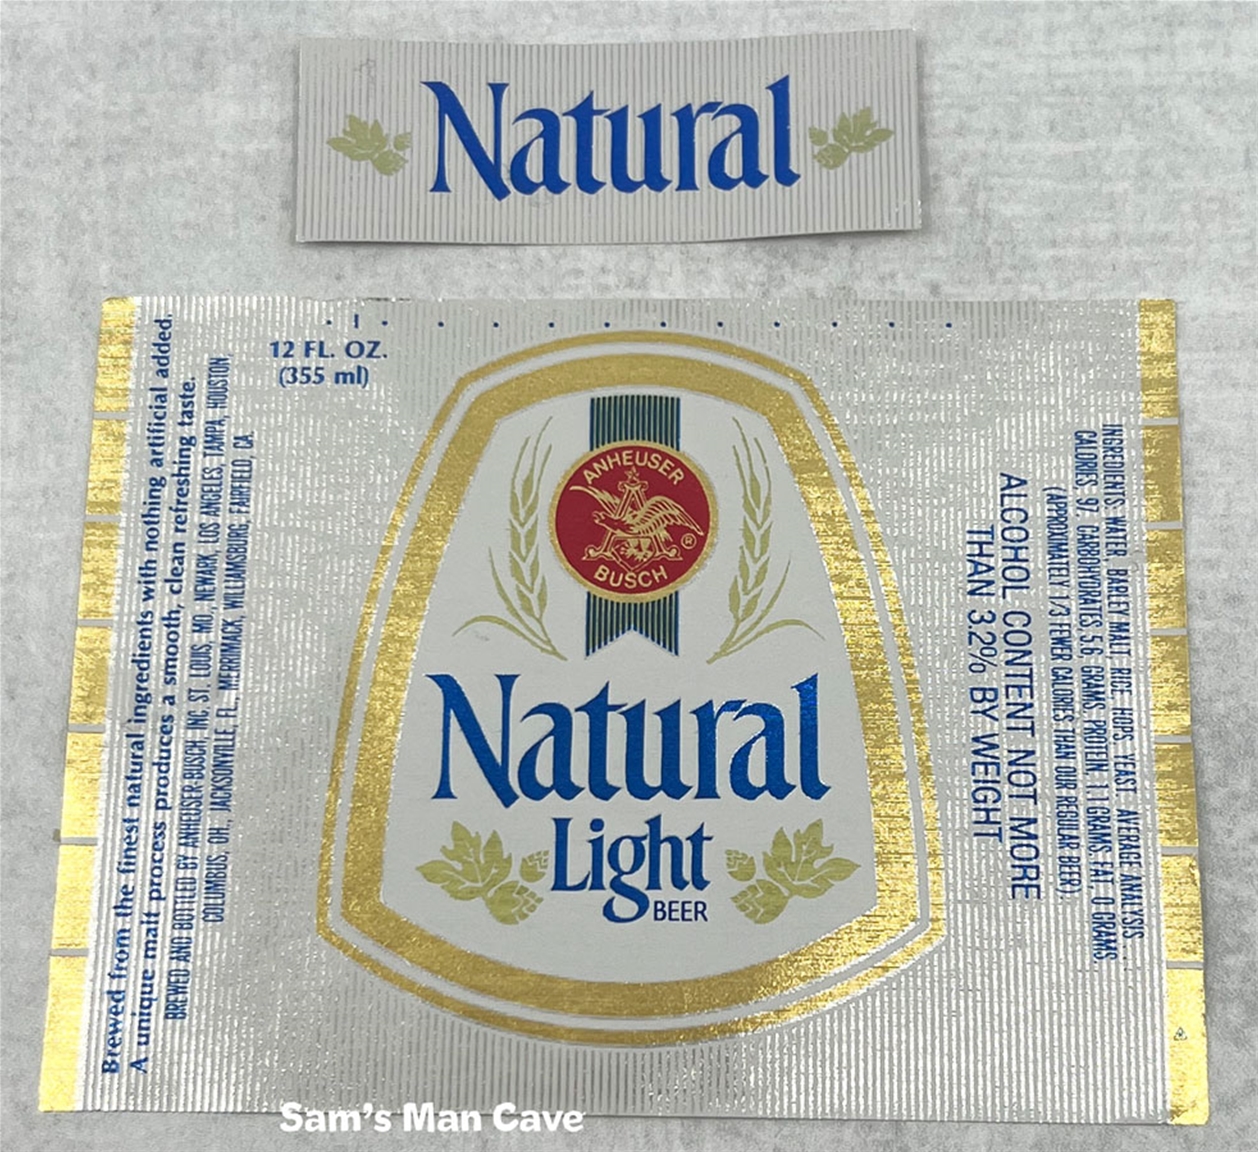 Natural Light Beer Label with neck